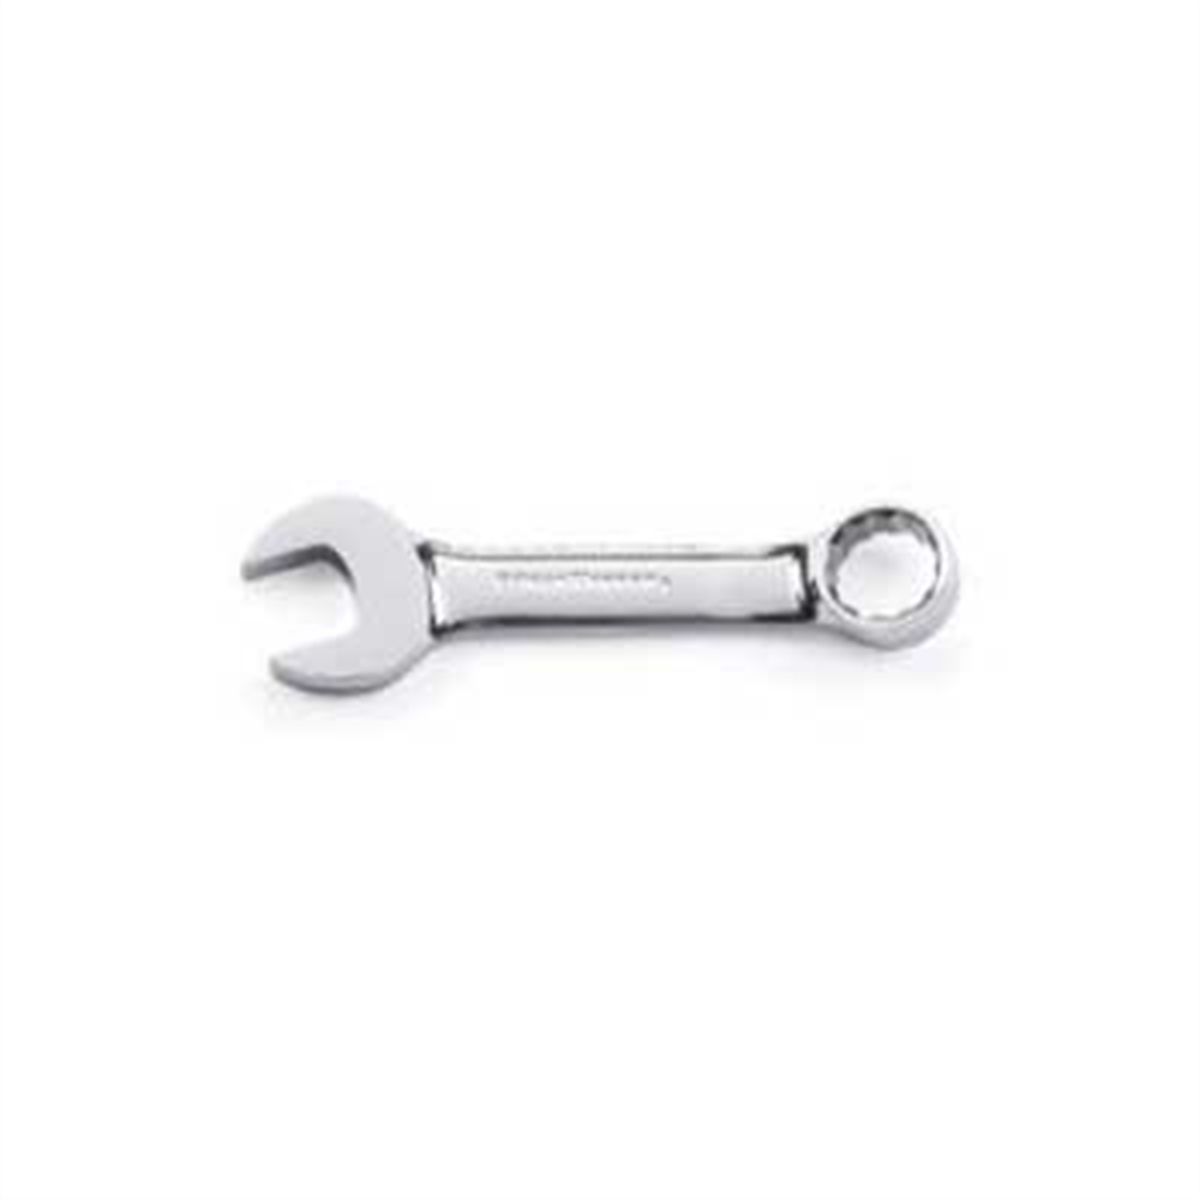 18 mm Stubby Combination Wrench